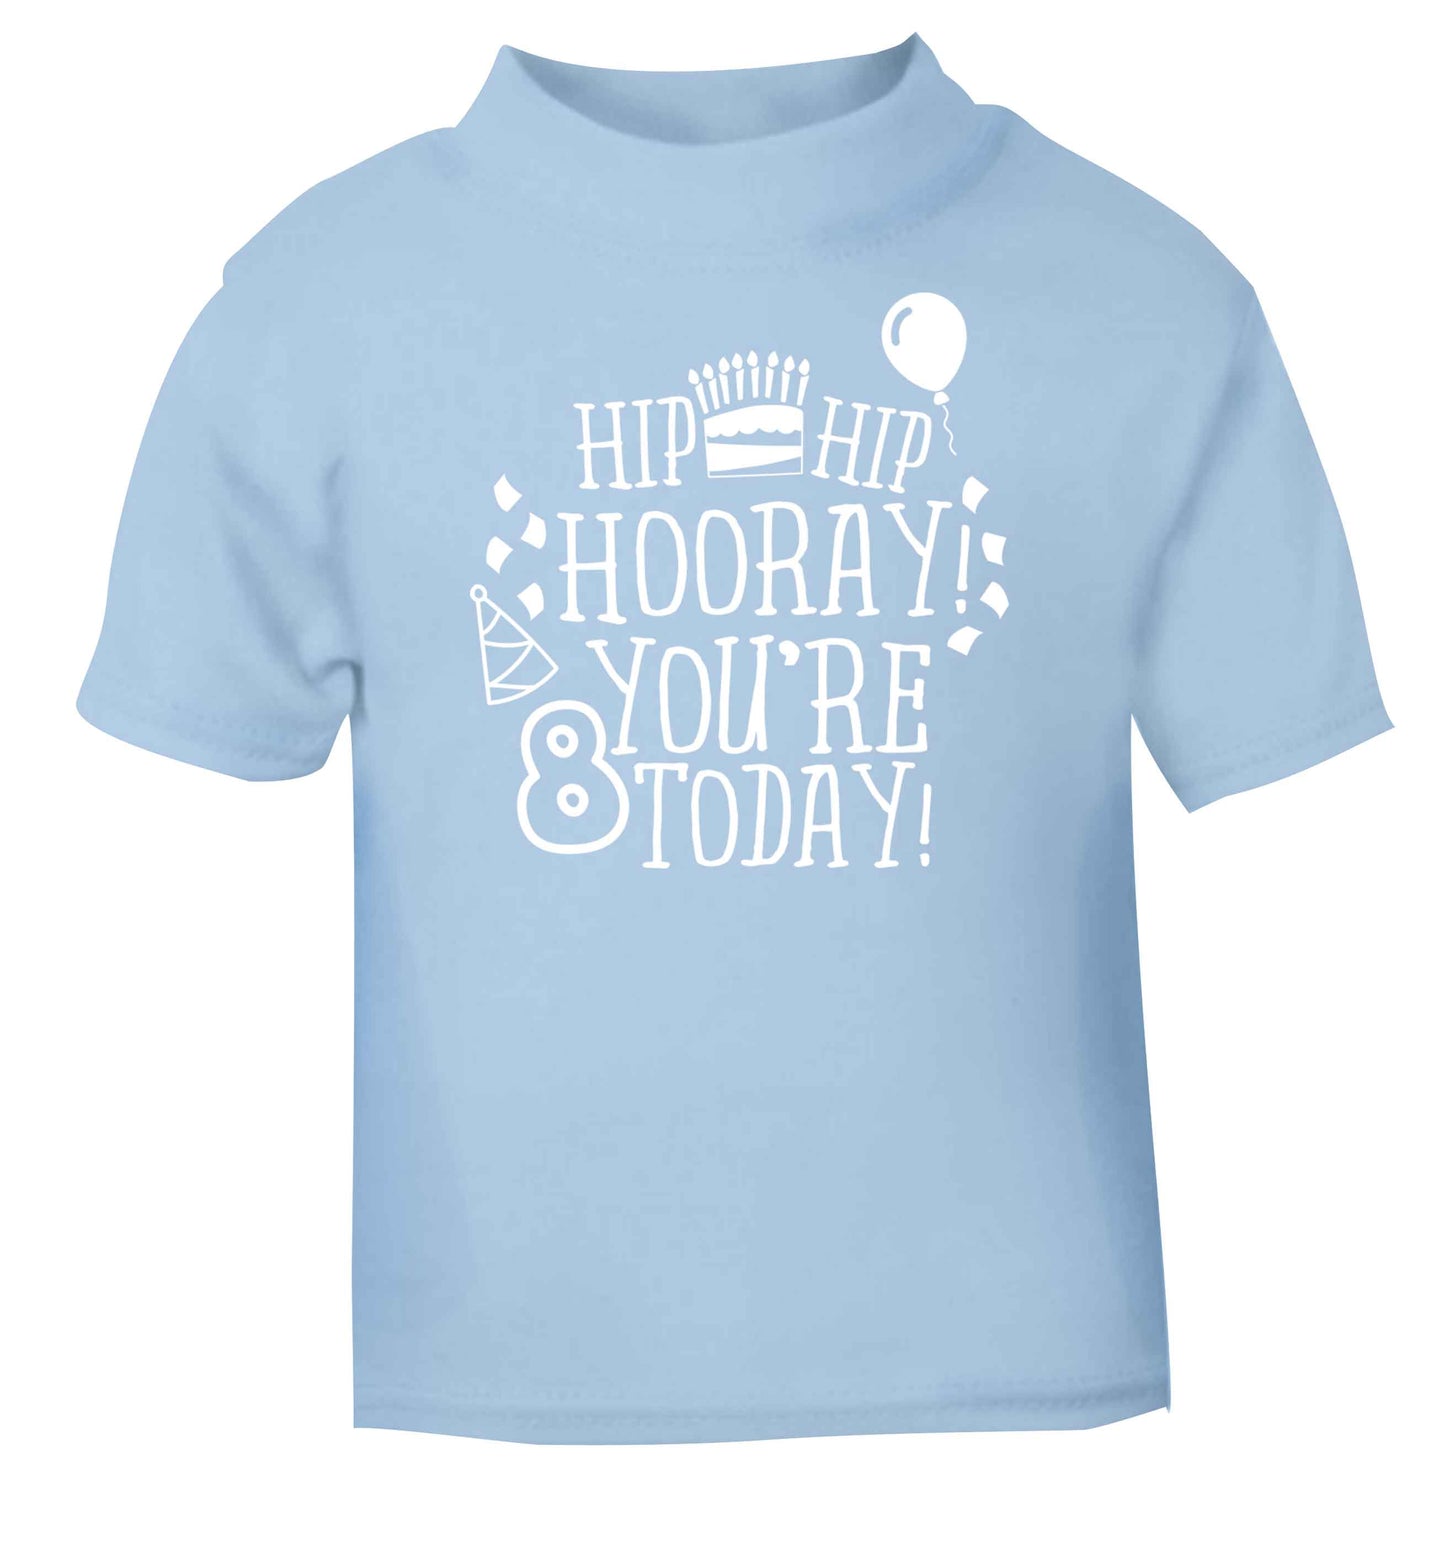 Hip hip hooray you're 8 today! light blue baby toddler Tshirt 2 Years